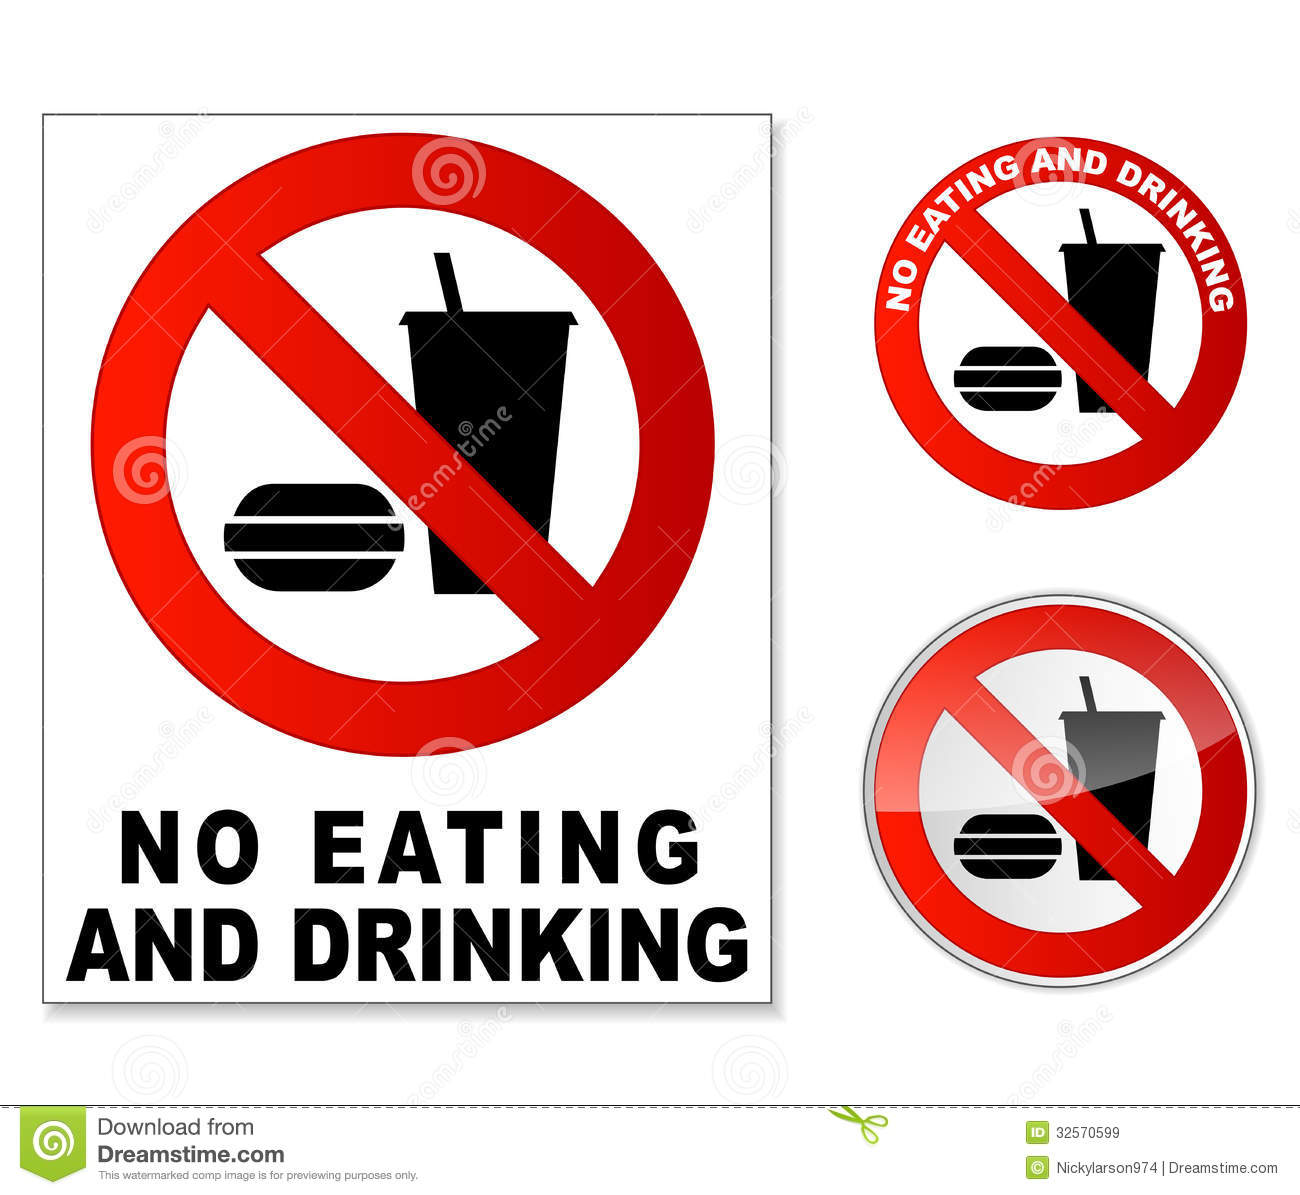 No Eating And Drinking Sign On White Background Mr No Pr No 0 771 0